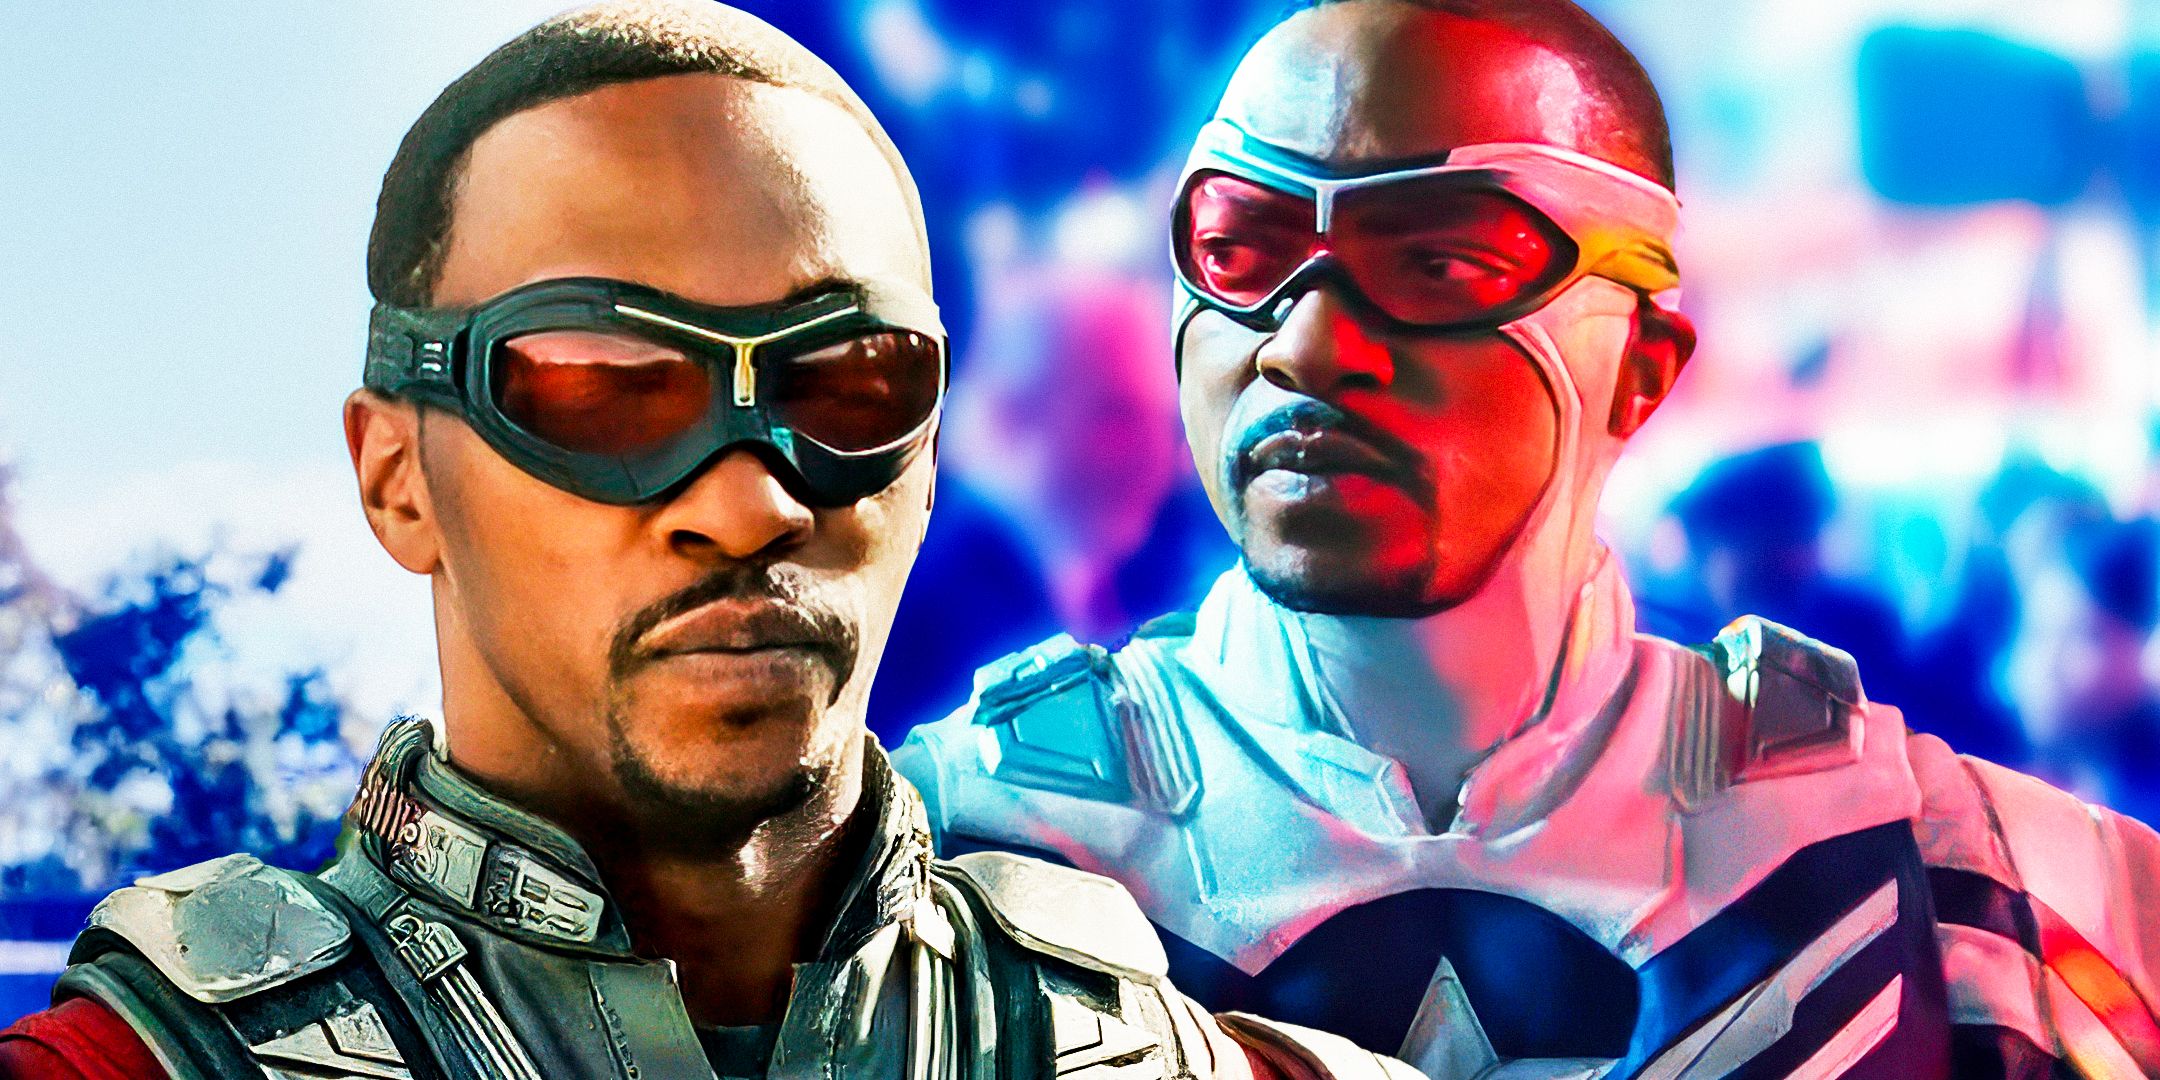 Sam Wilson's Complete MCU Timeline, From Falcon To Captain America